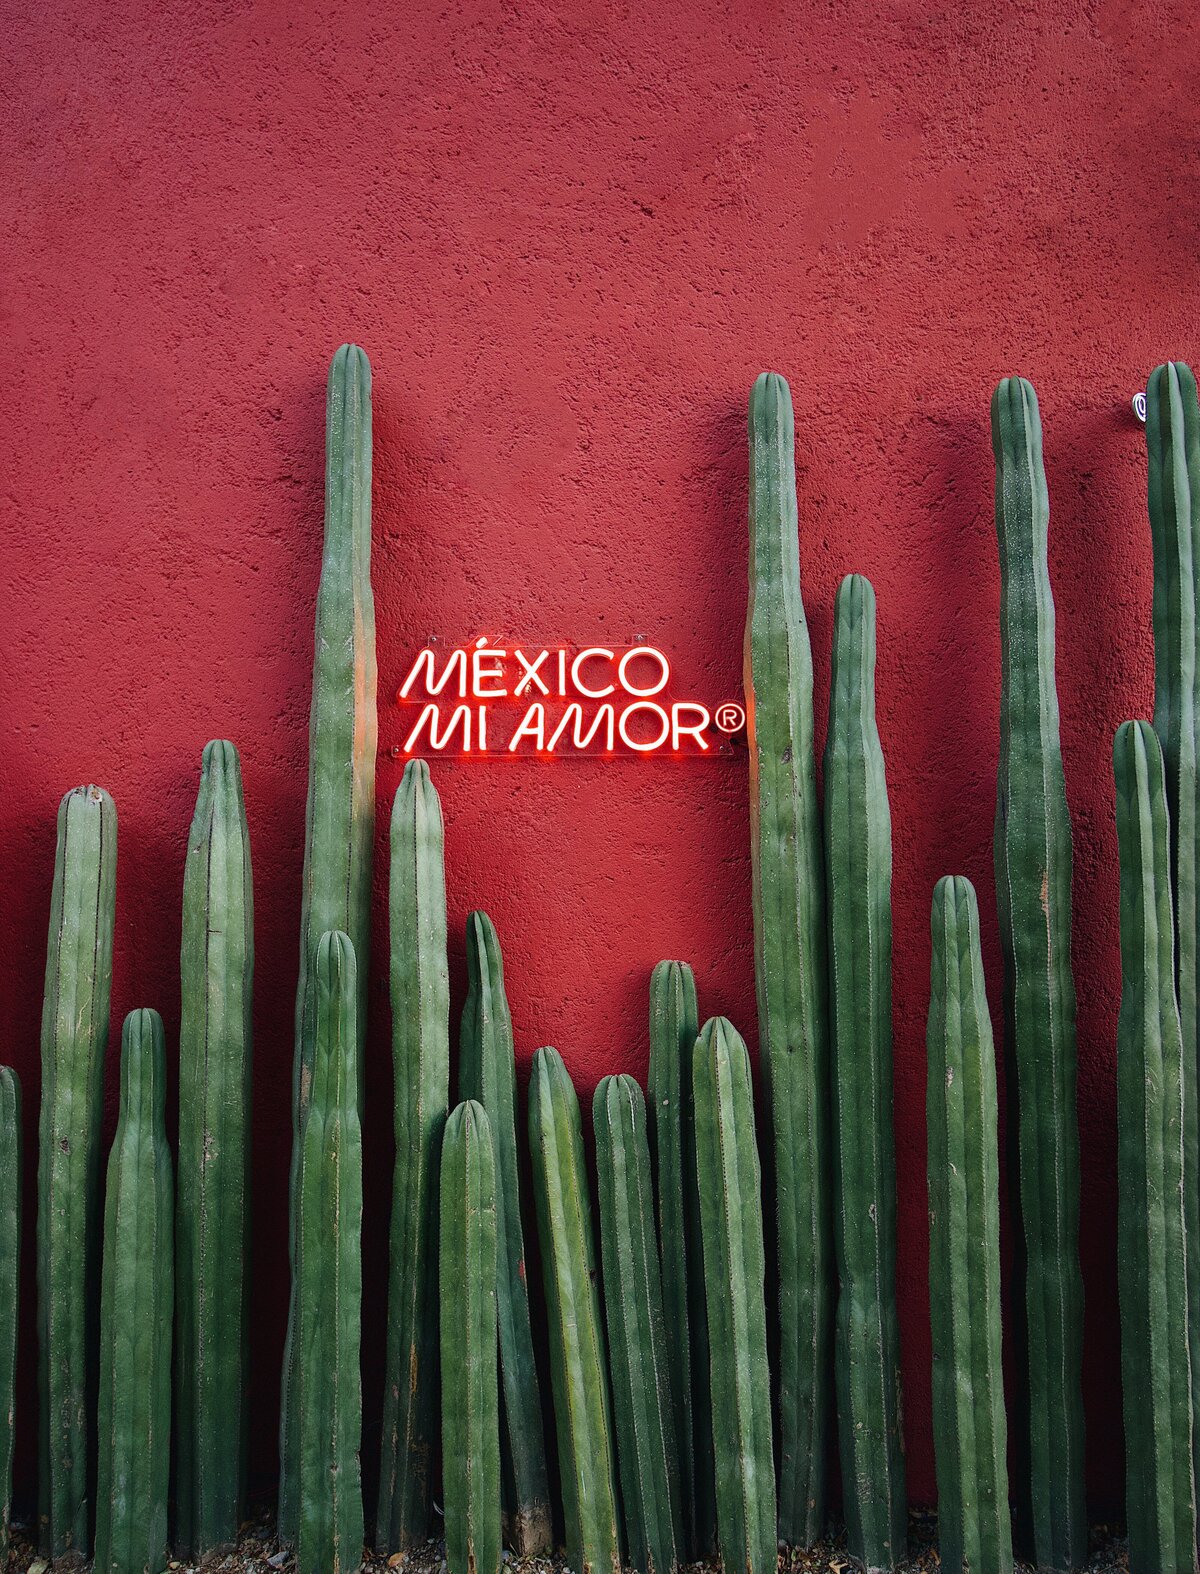 Red Mexico my love neon sign on red wall surrounded by tall cactus